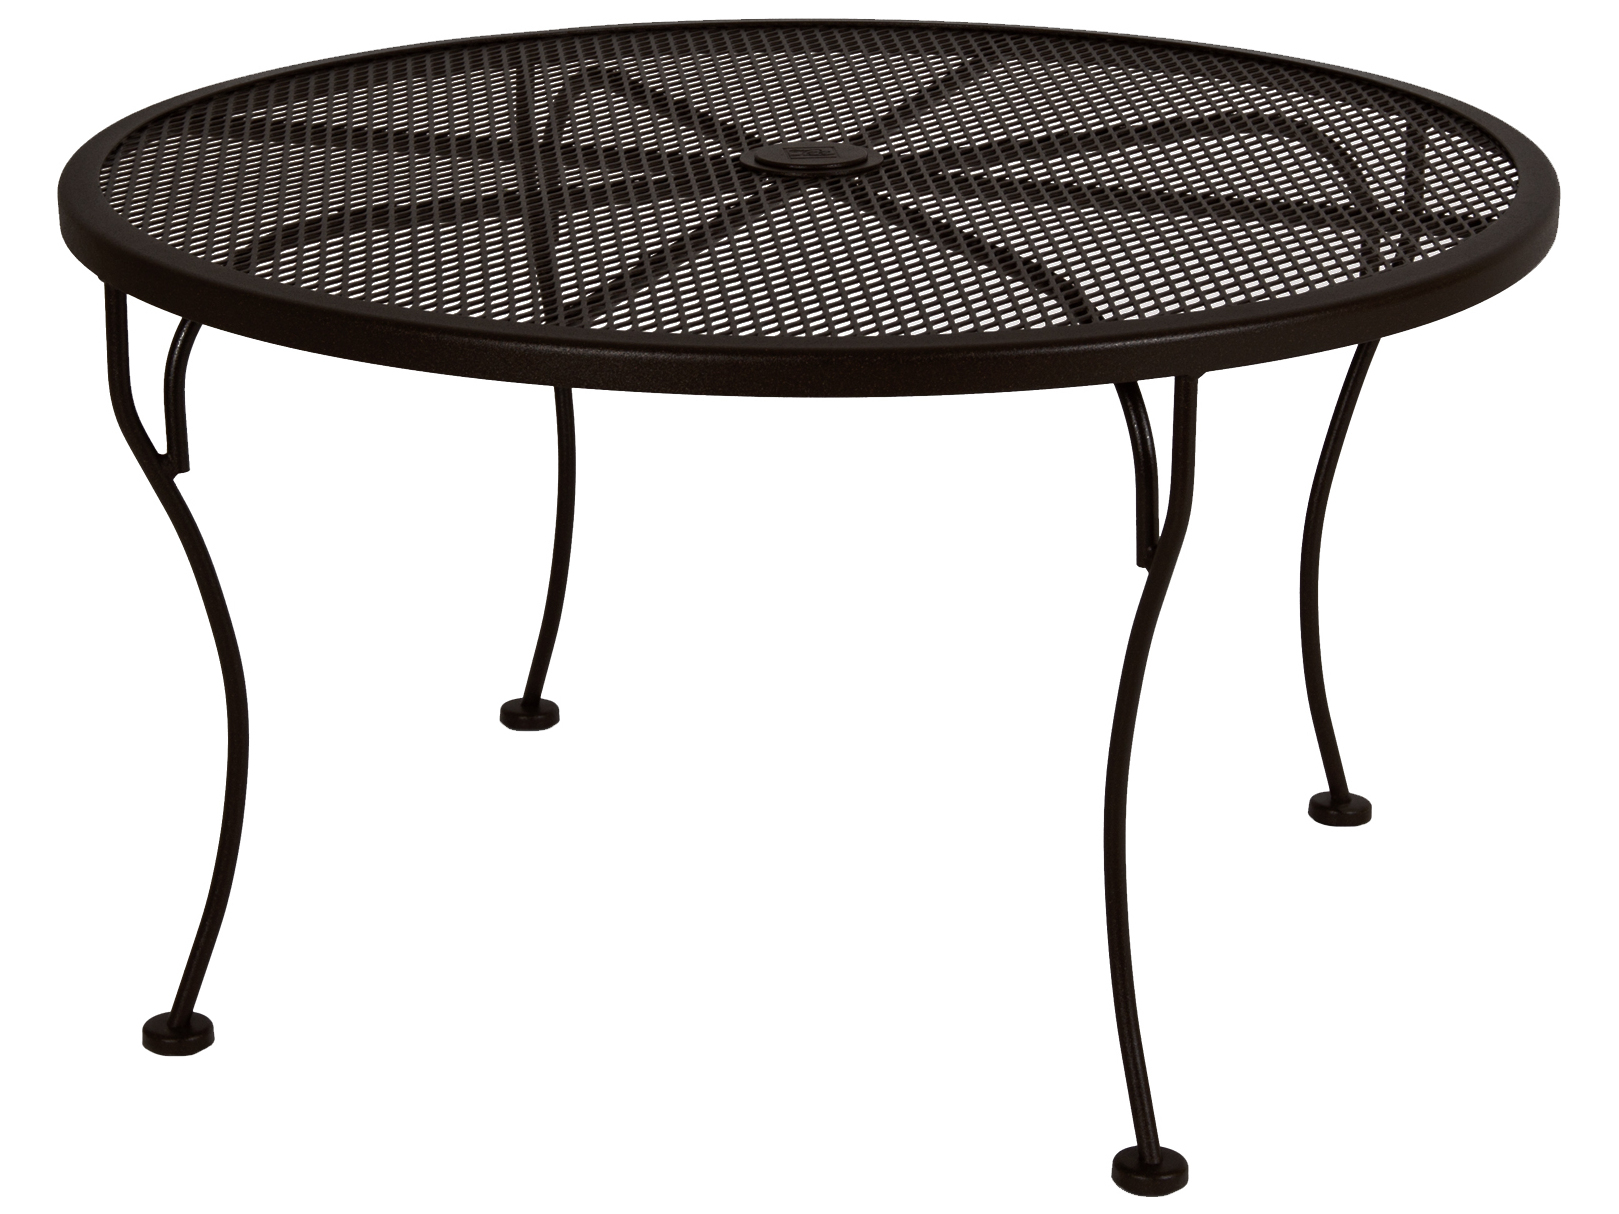 OW Lee Micro Mesh Wrought Iron 36 Round Side Table With Umbrella Hole